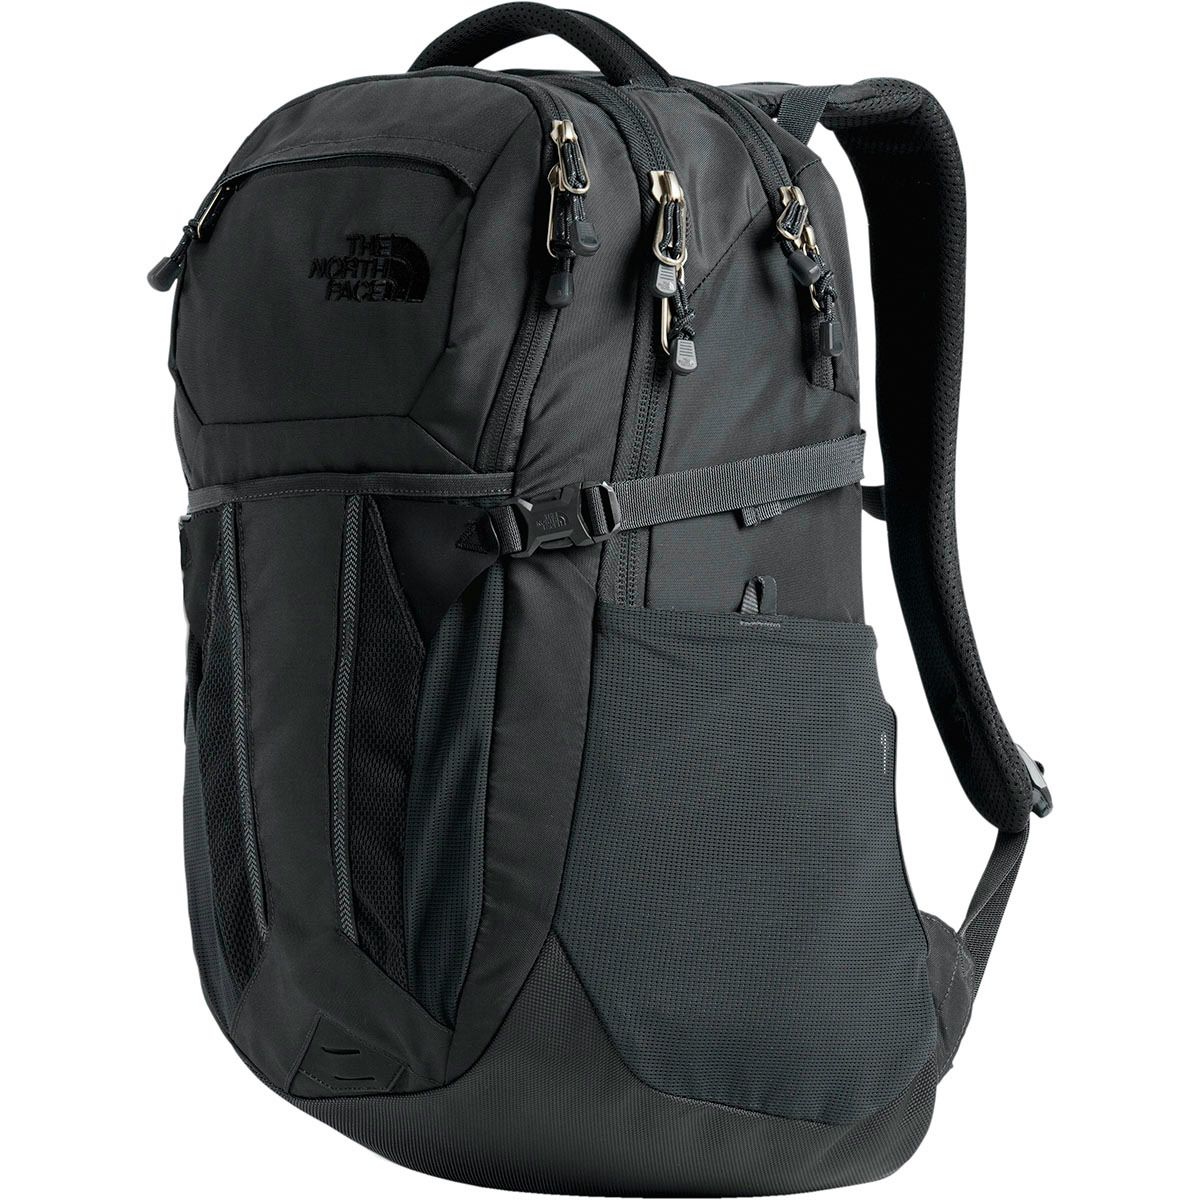 The North Face Recon 30L Backpack | Backcountry.com